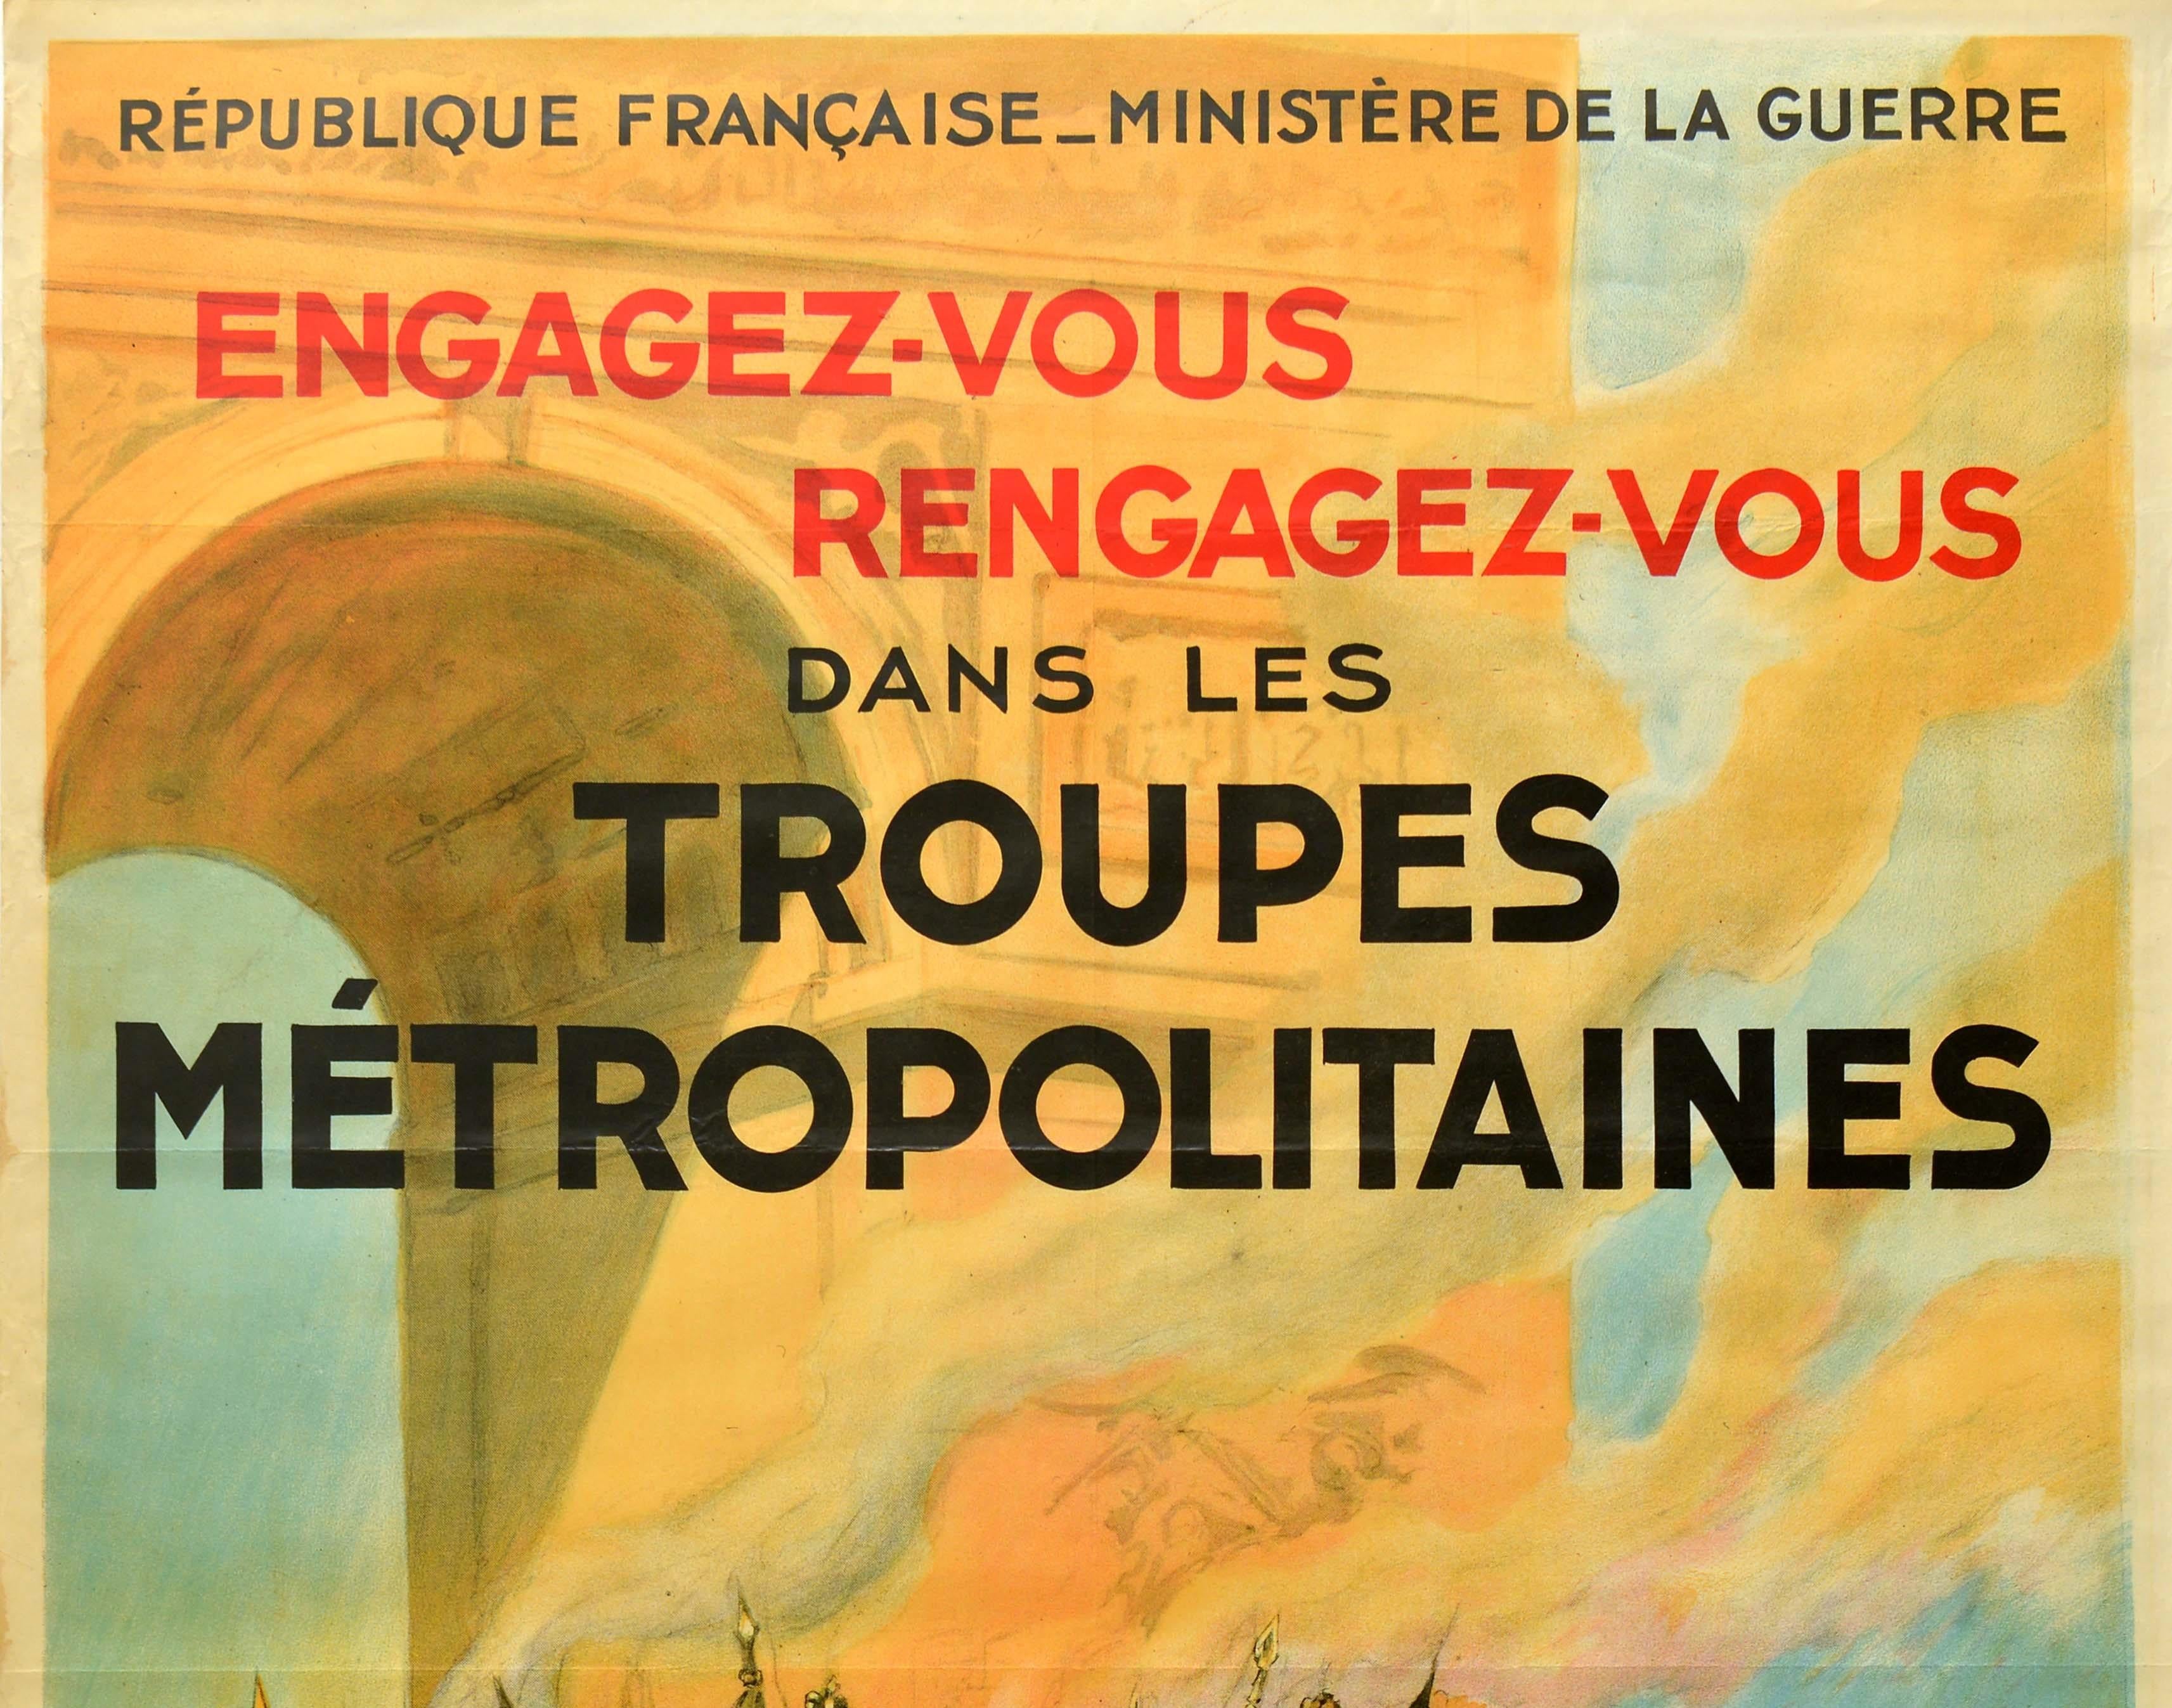 Original vintage military recruitment poster issued by the Ministry of War of the French Republic - Join re-join the Metropolitan Troops / Republique Francaise Ministere de la Guerre Engagez-vous Rengagez-vous dans les Troupes Metropolitaines -